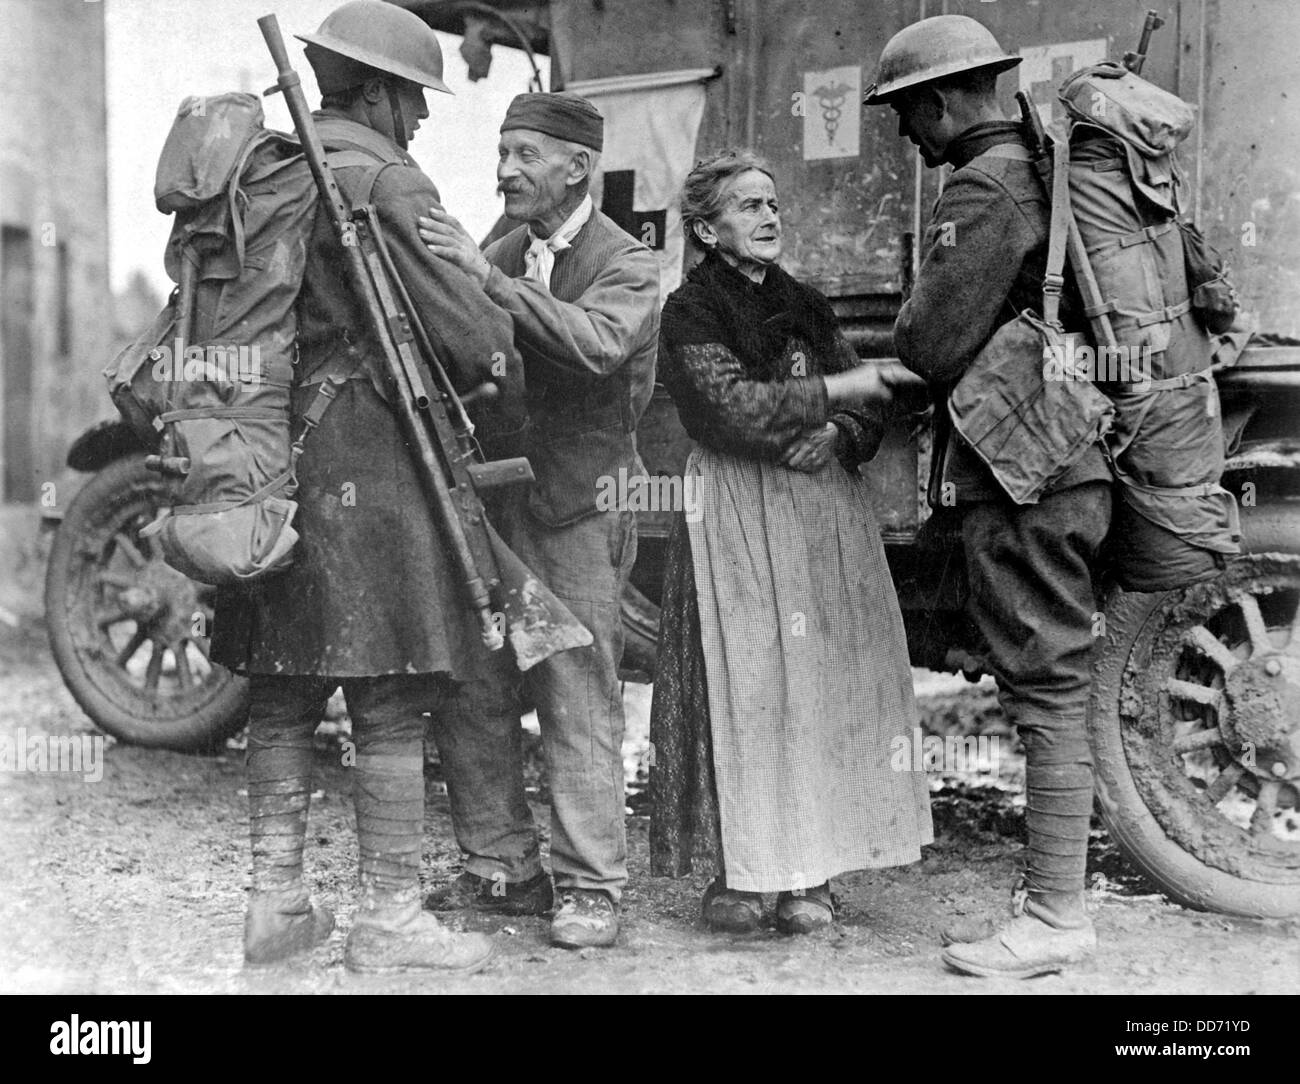 M. and Mme. Baloux of Brieulles-sur-Bar, France, endured German occupation for four years, greeting American soldiers in the Stock Photo